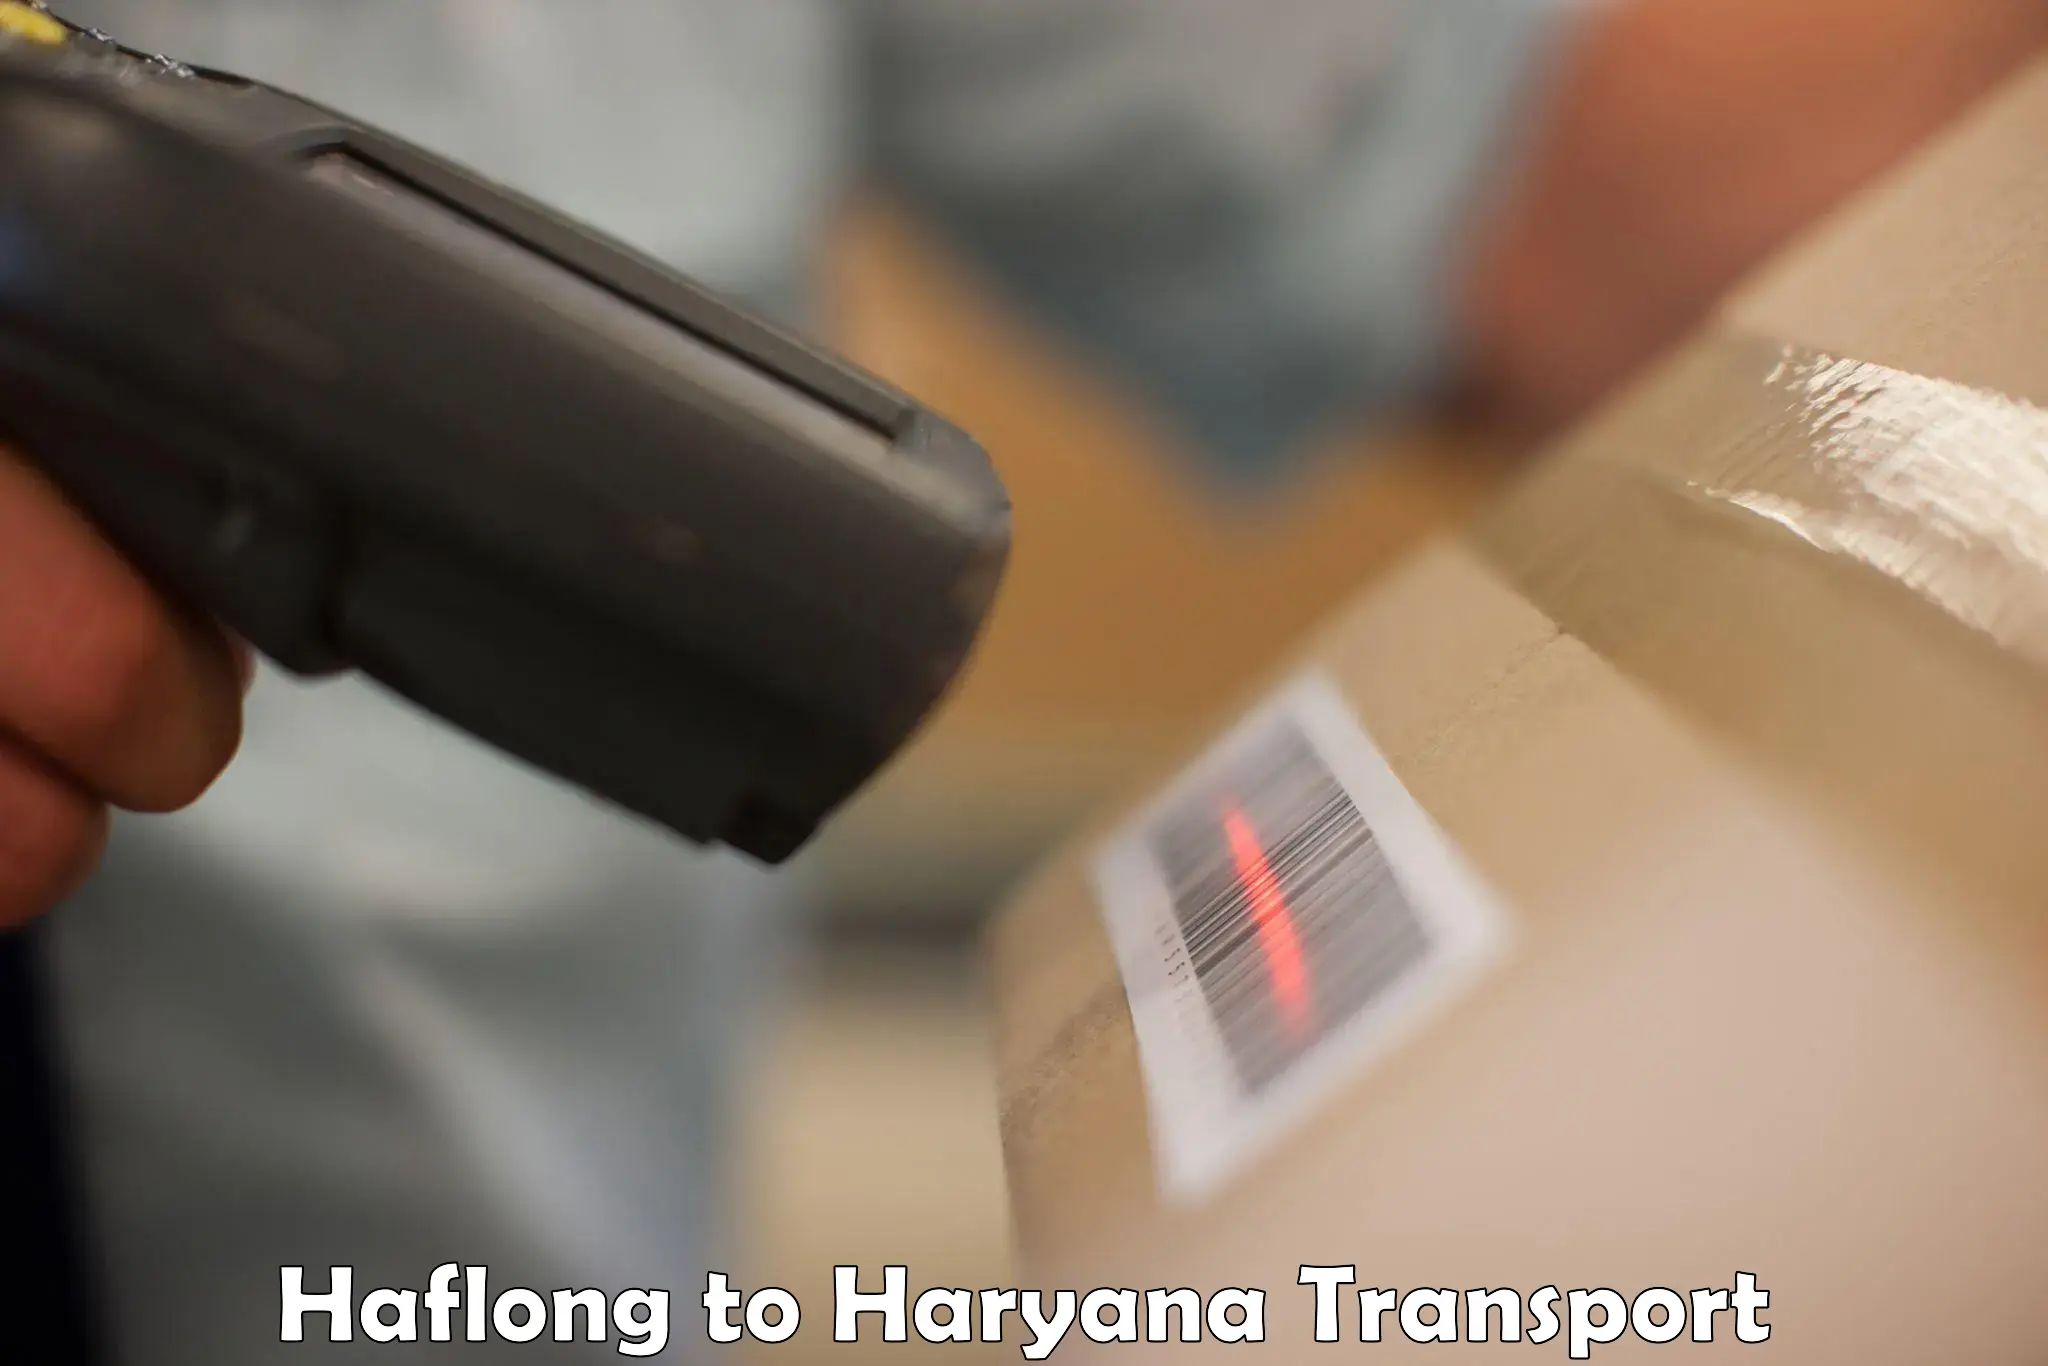 Delivery service in Haflong to NCR Haryana